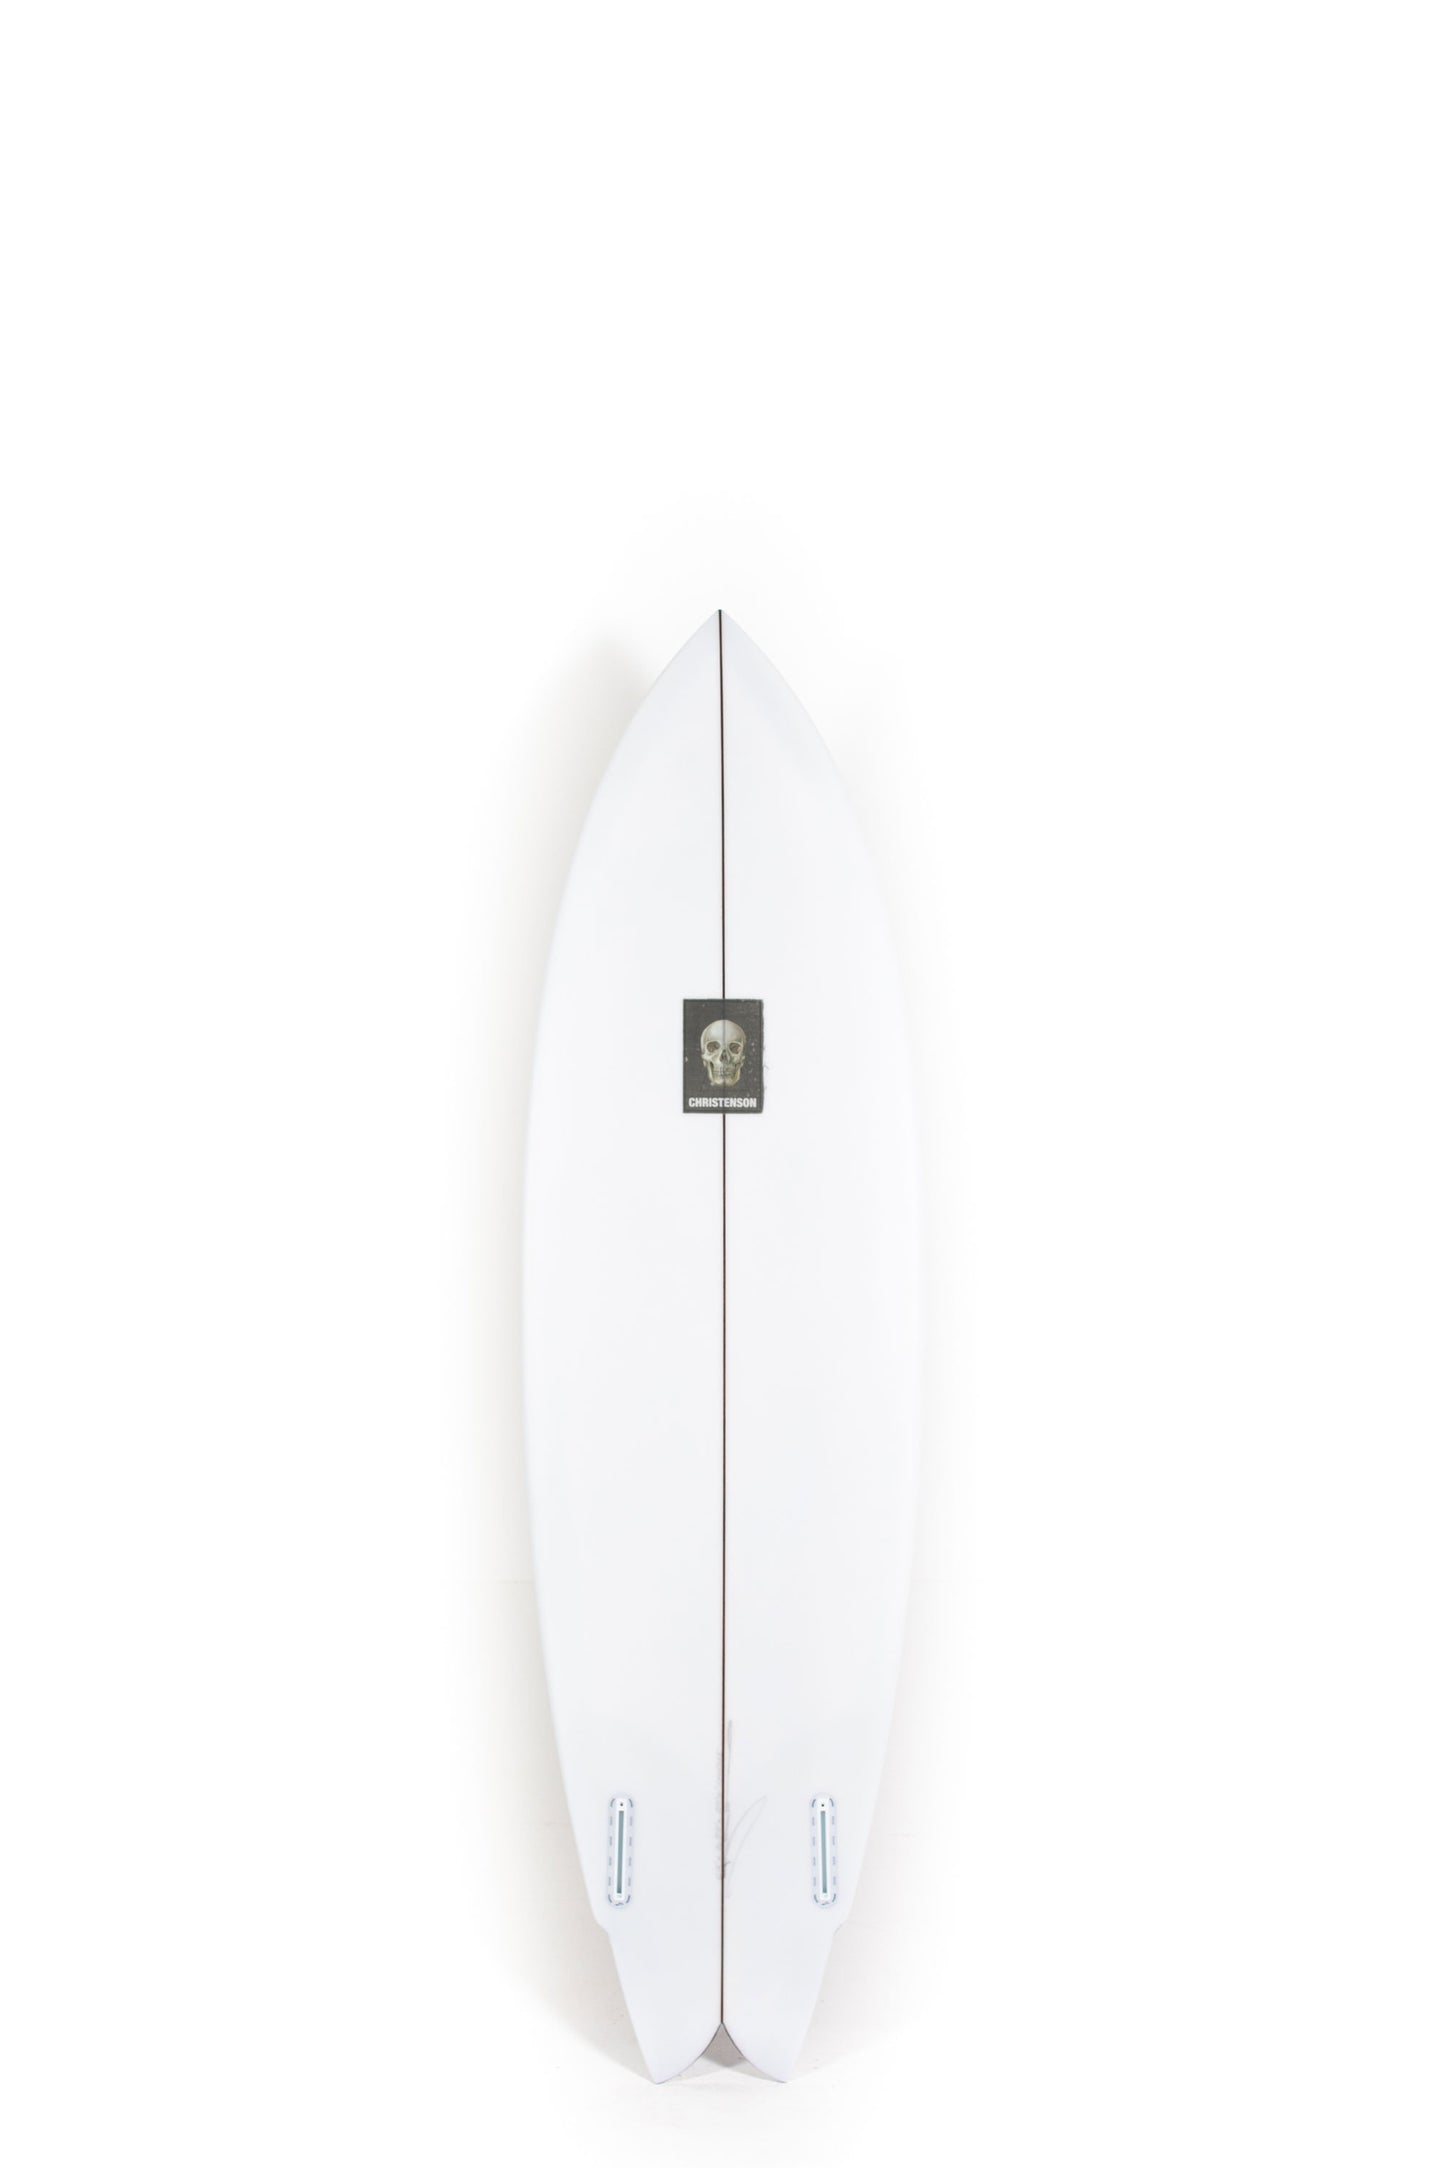 CHRISTENSON SURFBOARDS | Available online at PUKAS SURF SHOP – Page 2